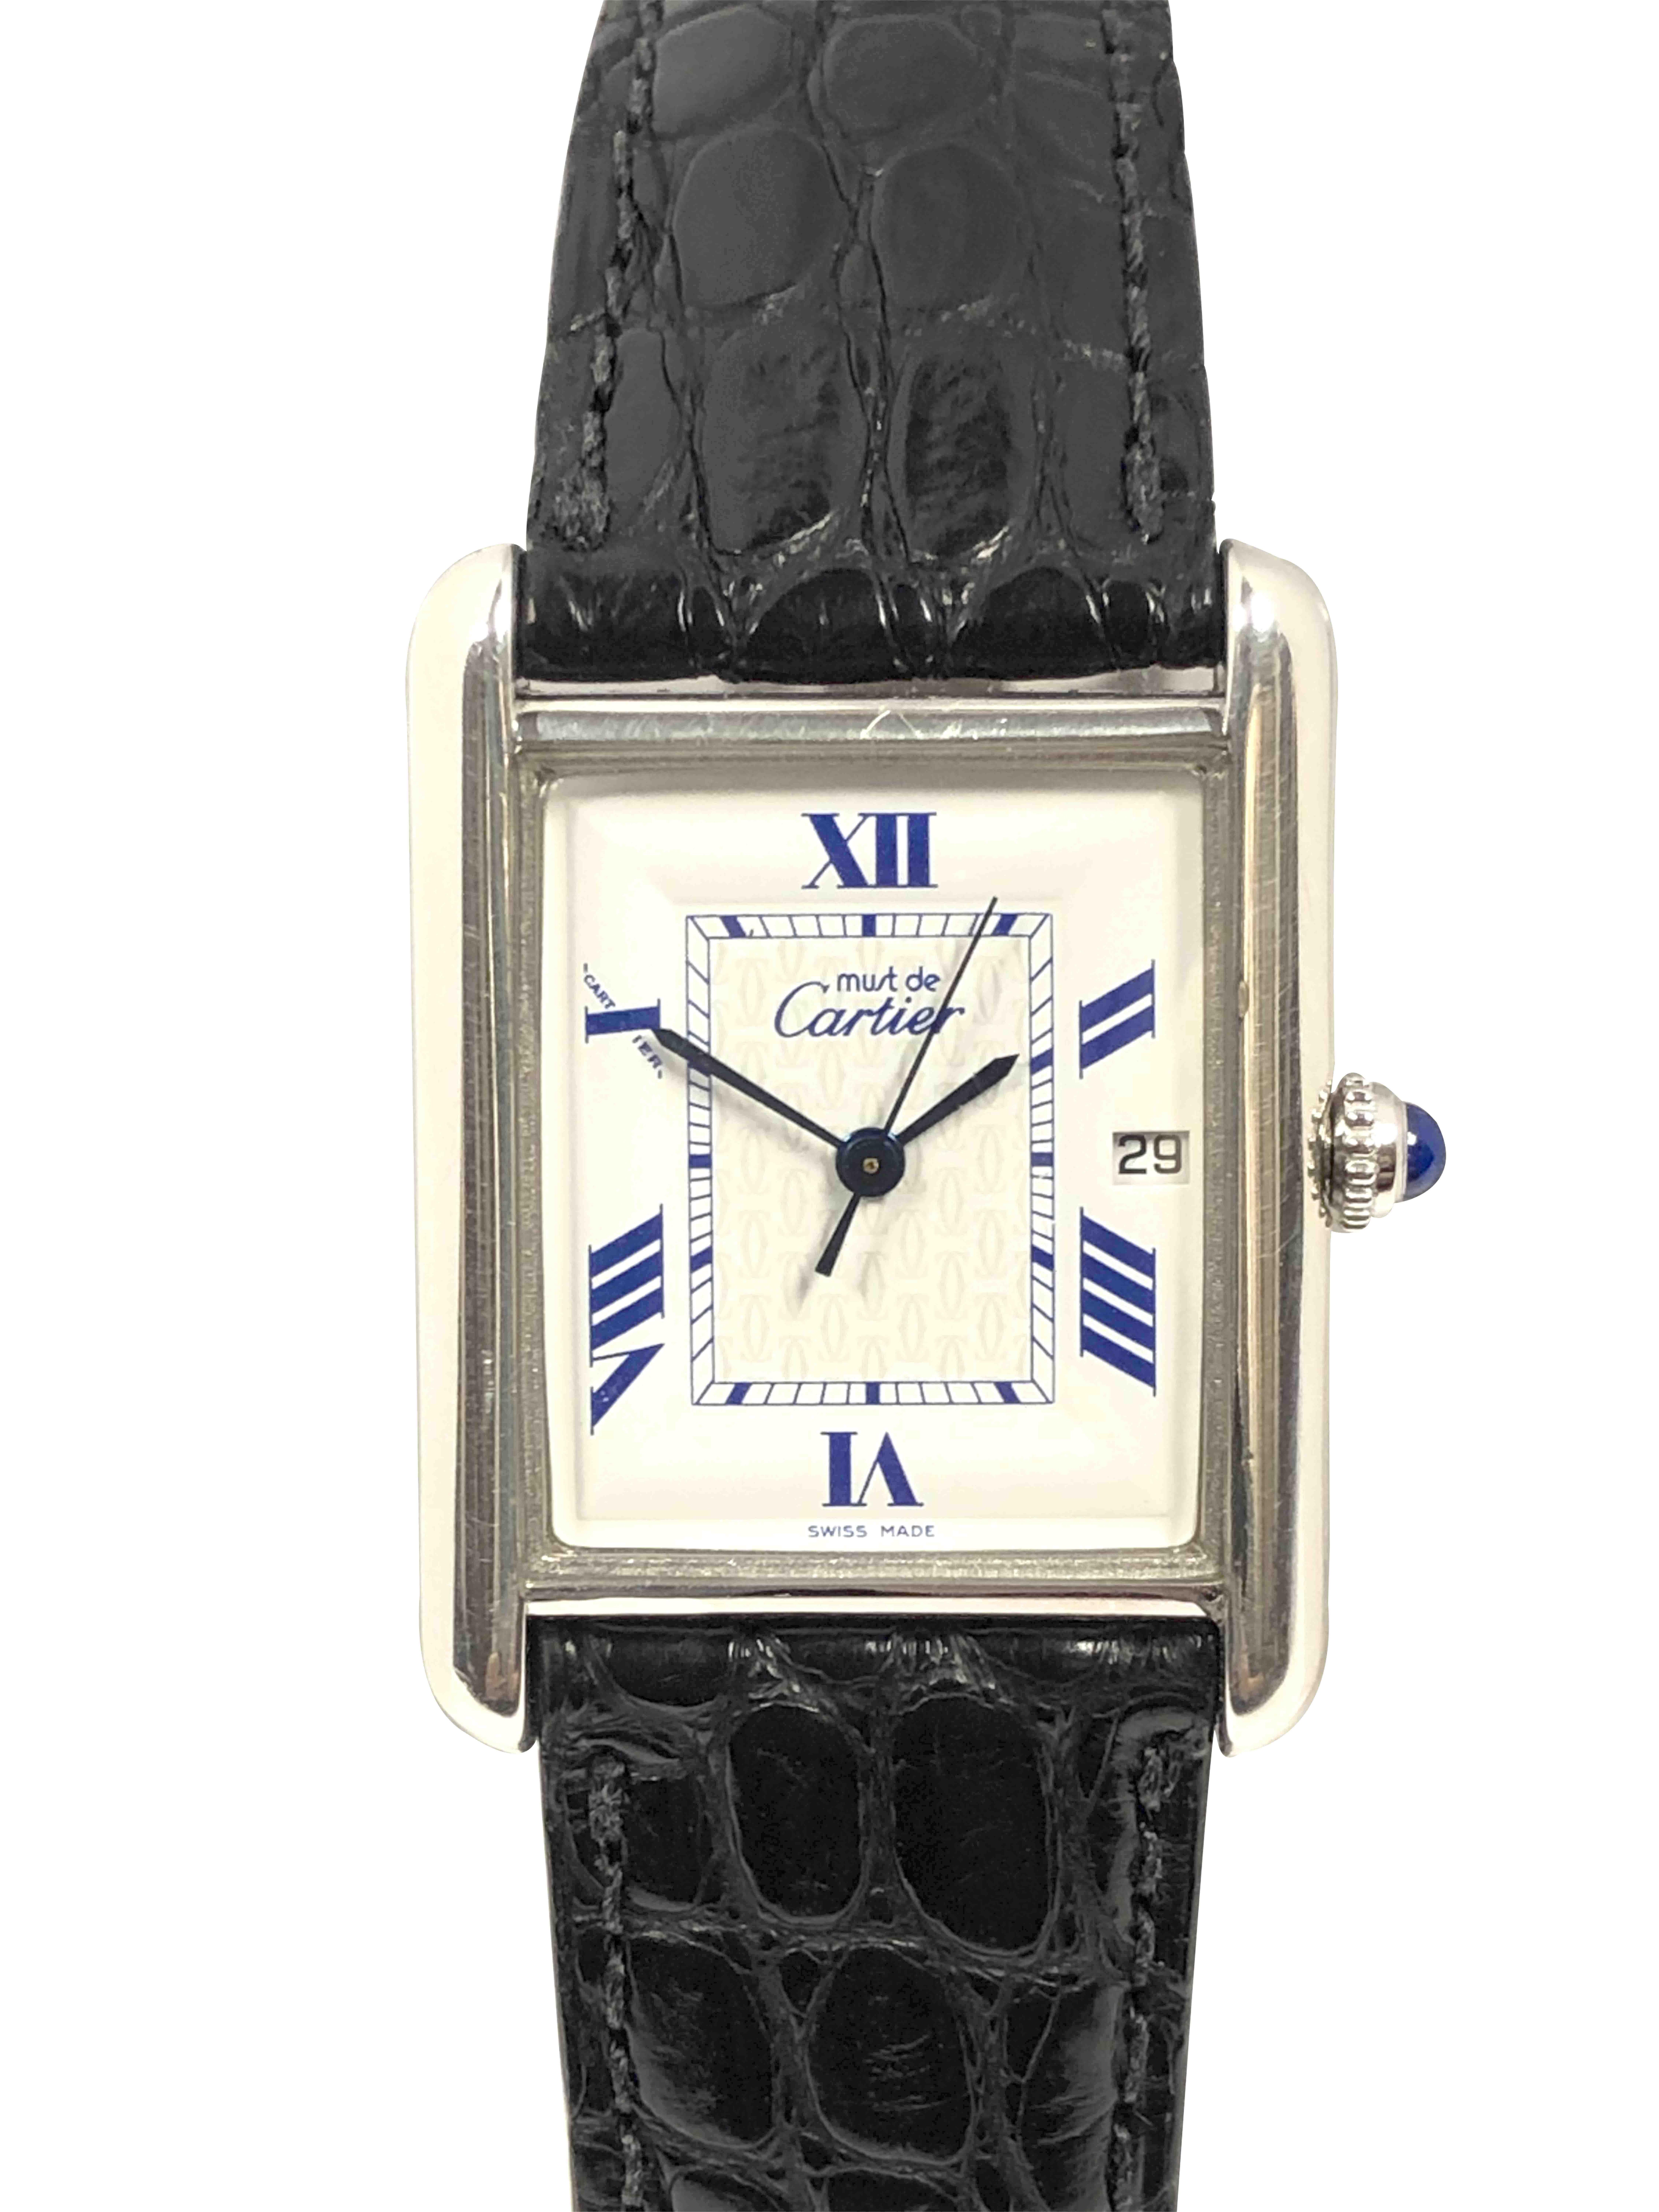 Circa 2005 Cartier Classic Tank Wrist watch, 34 X 25 M.M. Sterling Silver 2 Piece Water Resistant case. Quartz Movement, White Dial with Blue Roman numerals, Cartier Logo Dial center, Calendar window at the 3 position, sweep seconds hand and a